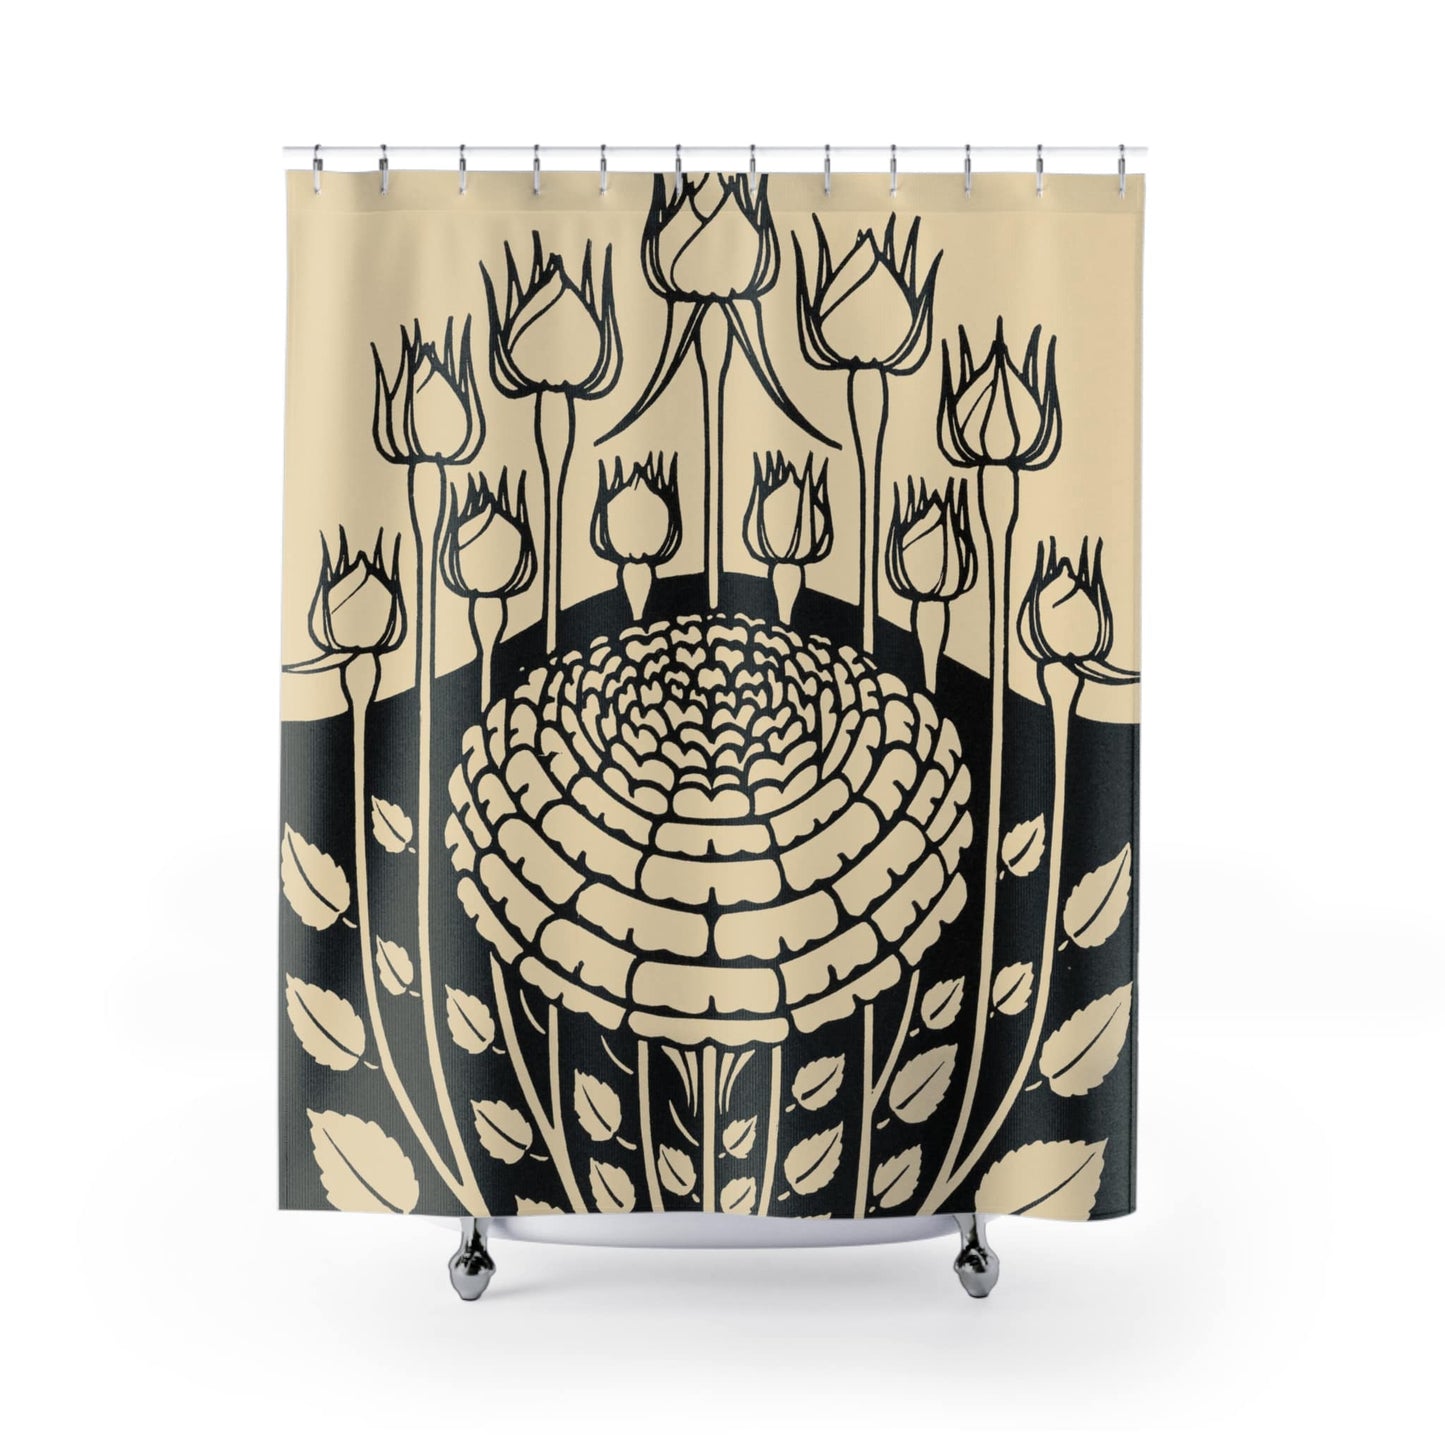 Rose Bush Shower Curtain with ink drawing design, artistic bathroom decor featuring detailed rose illustrations.